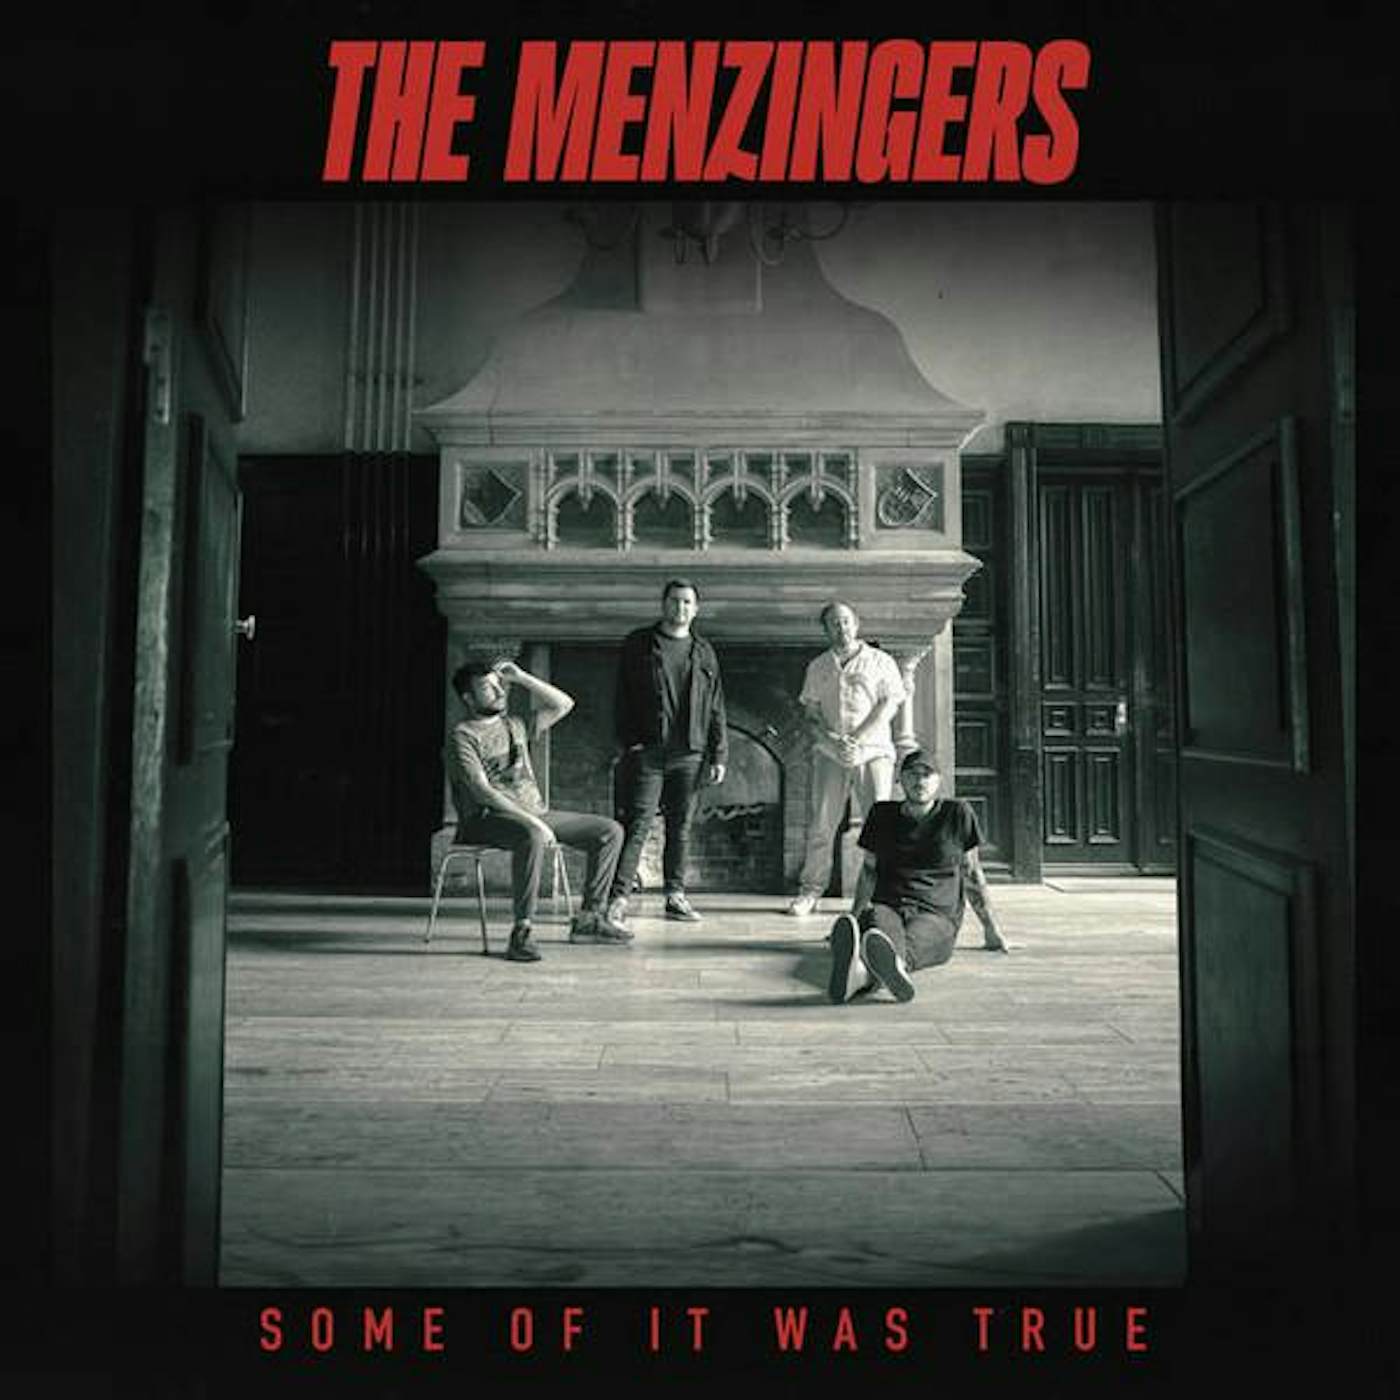 The Menzingers SOME OF IT WAS TRUE Vinyl Record